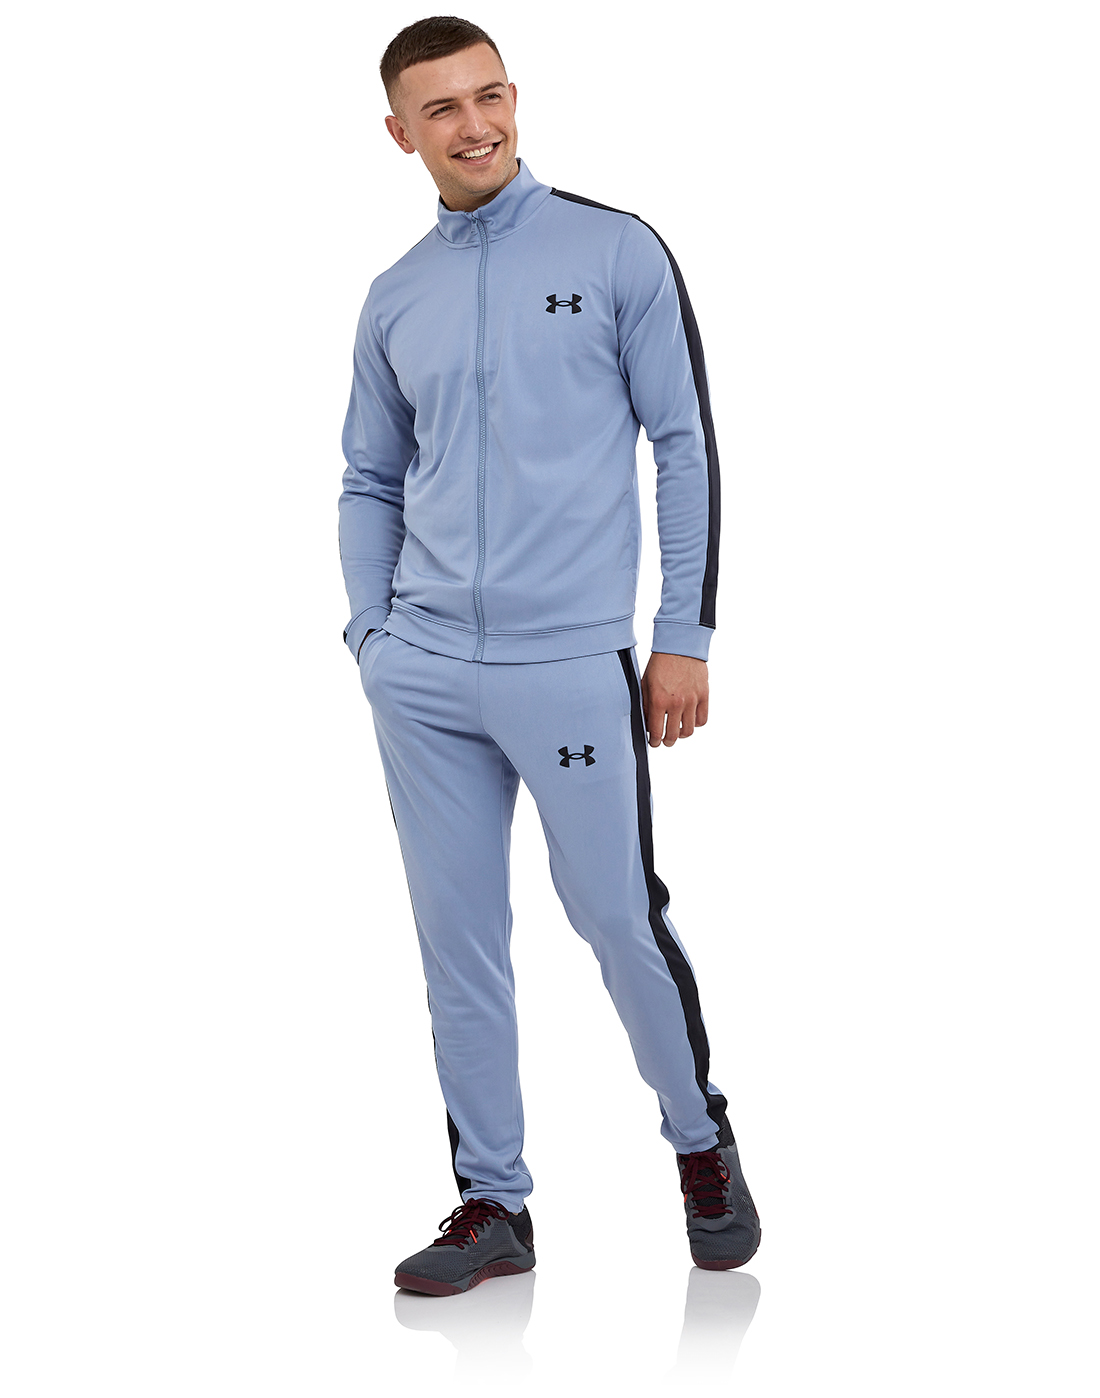 Under | - EU Knit Blue Mens Sports Armour Life Style TrackSuit